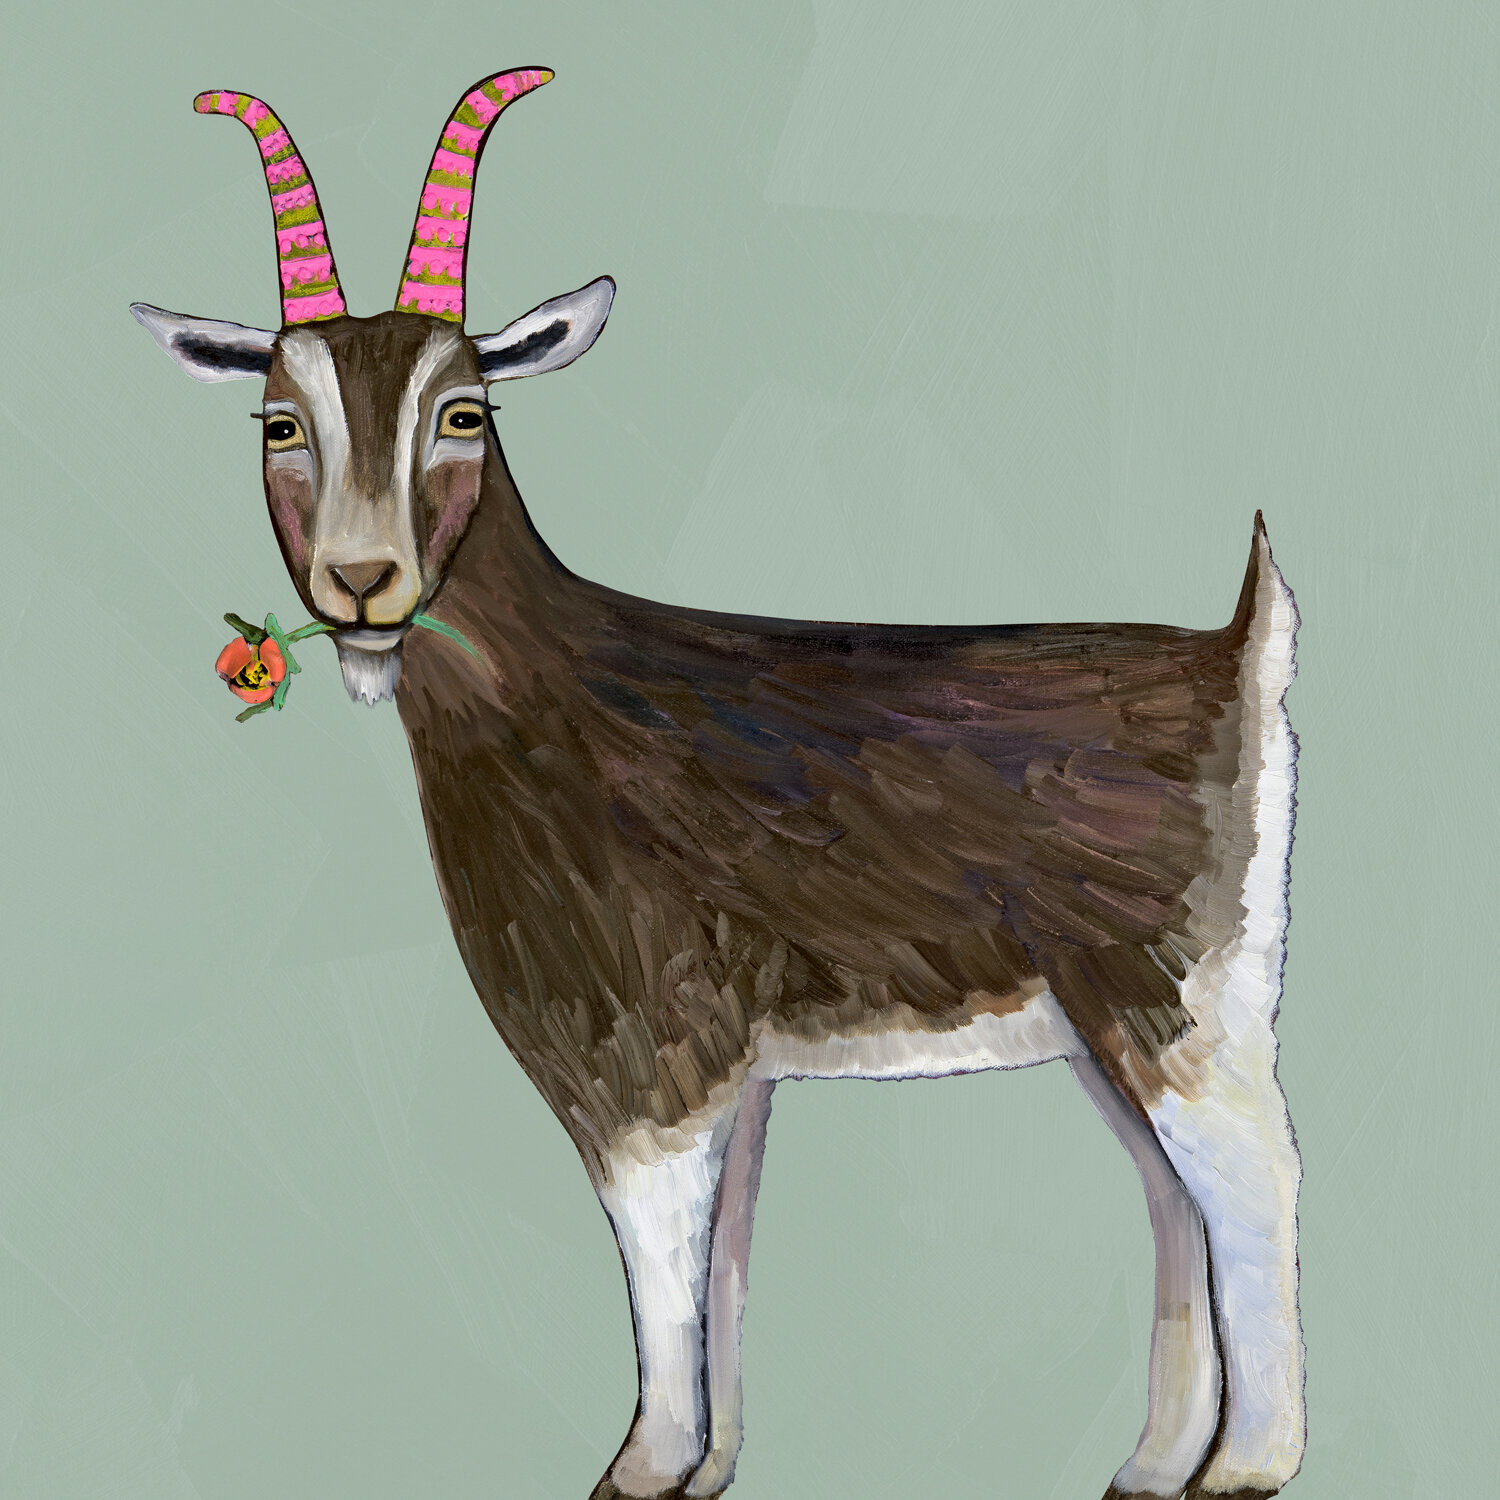 Goat Coloring Pages (100% Free Printables)